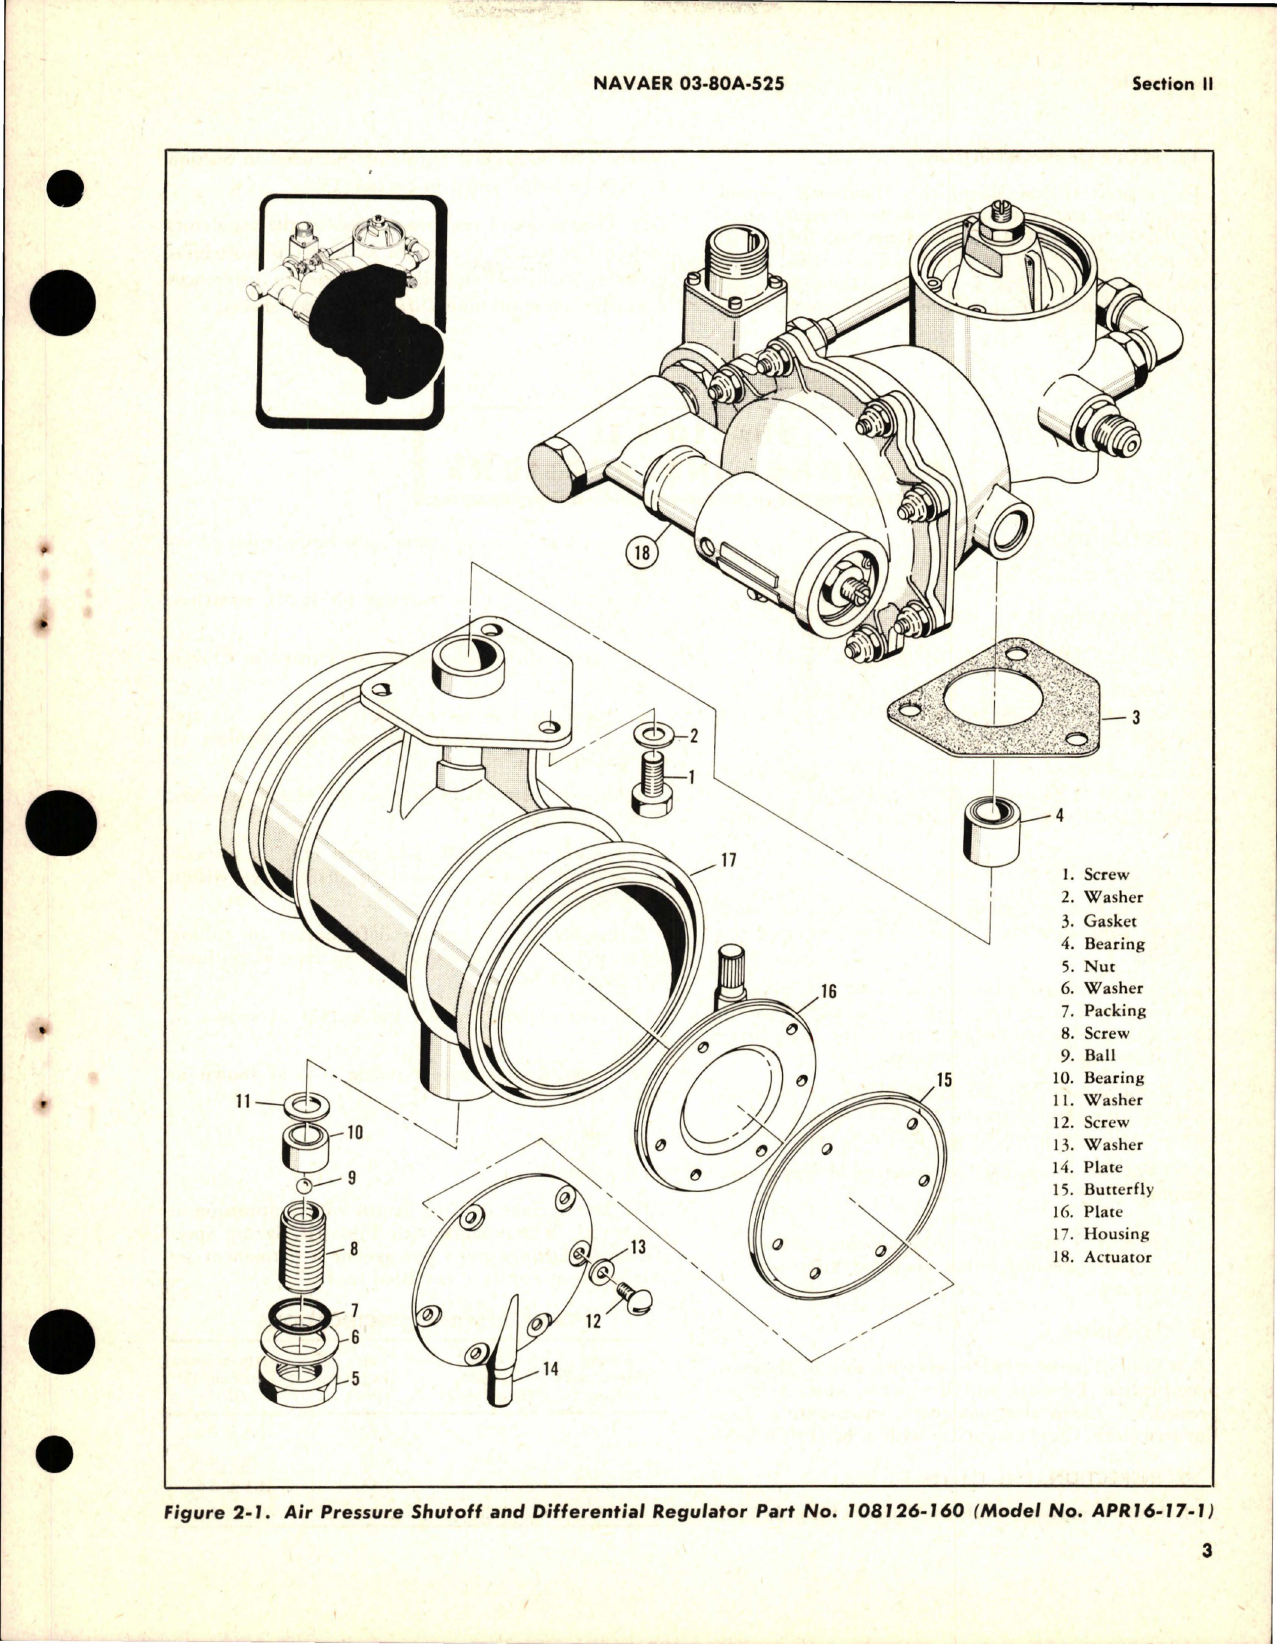 Sample page 7 from AirCorps Library document: Overhaul Instructions for Air Pressure Shutoff and Differential Regulator - Part 108126-160 - Model APR16-17